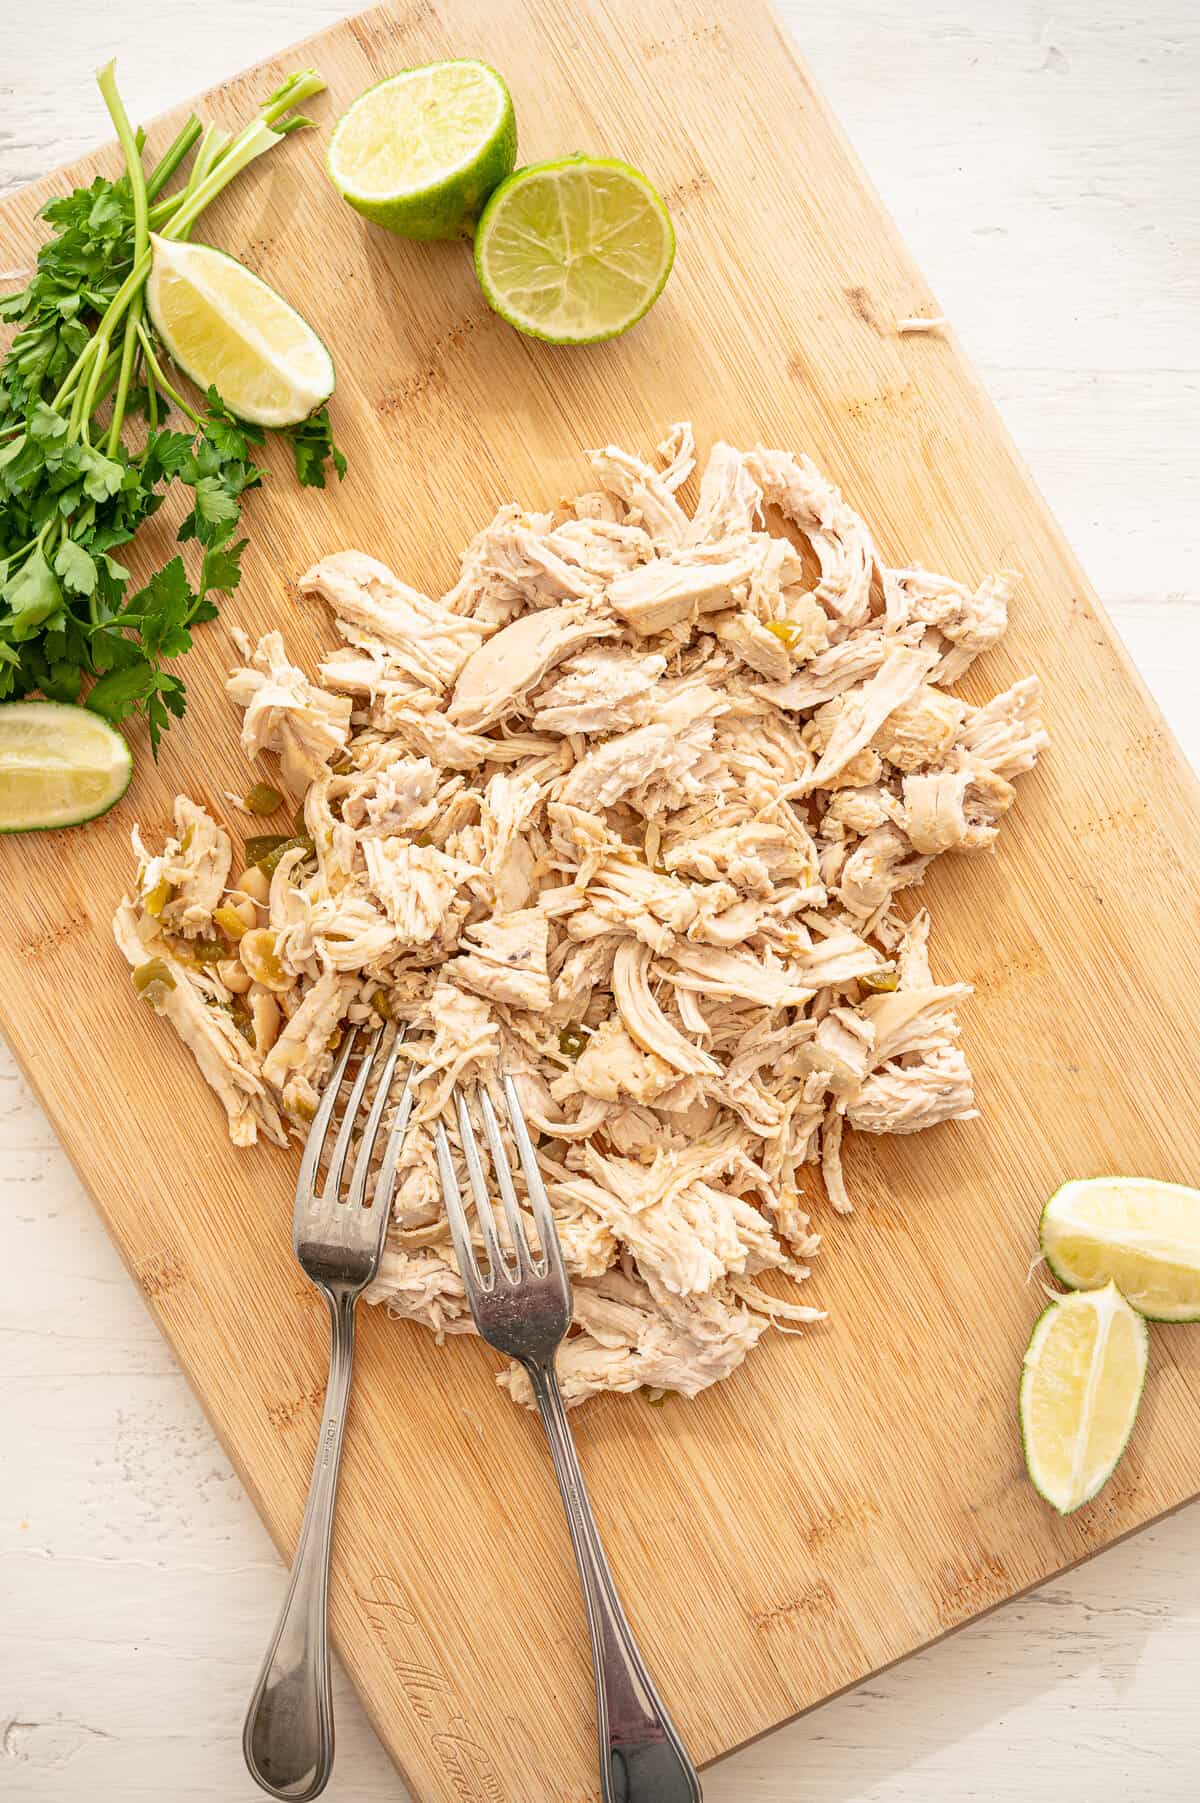 Shredded chicken on a wooden cutting board with two forks and lime wedges as well.